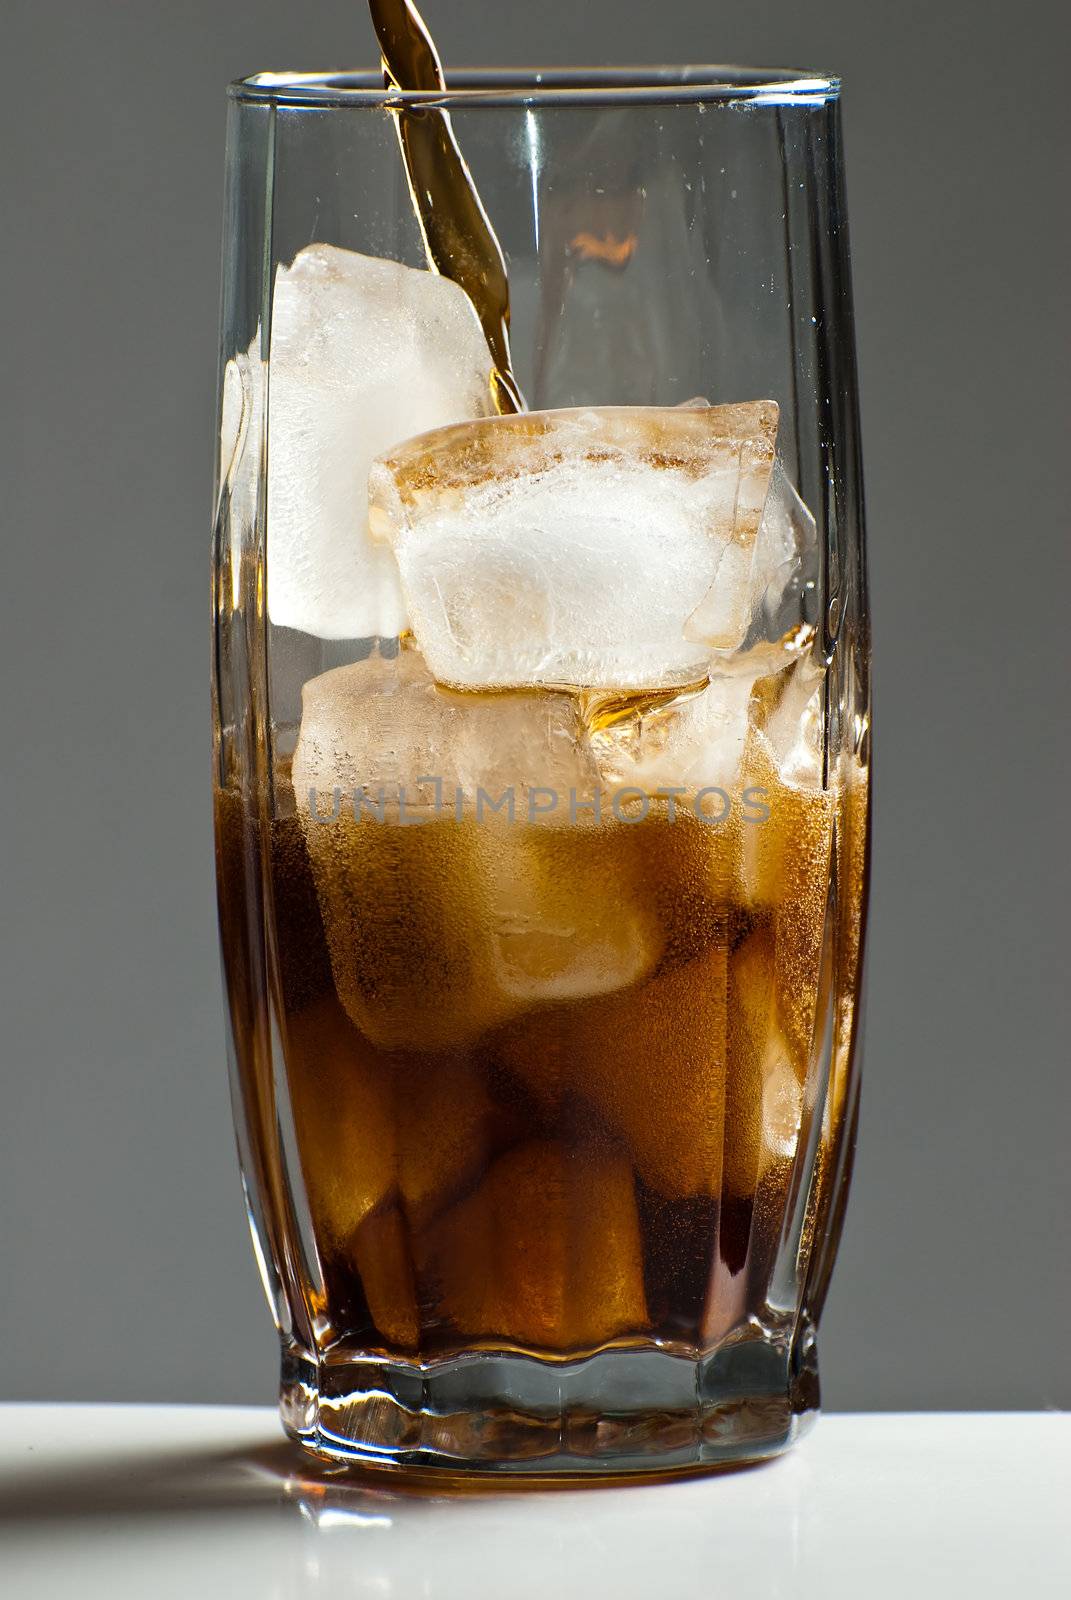 Cola being poured into a glass that is filled with ice cubes